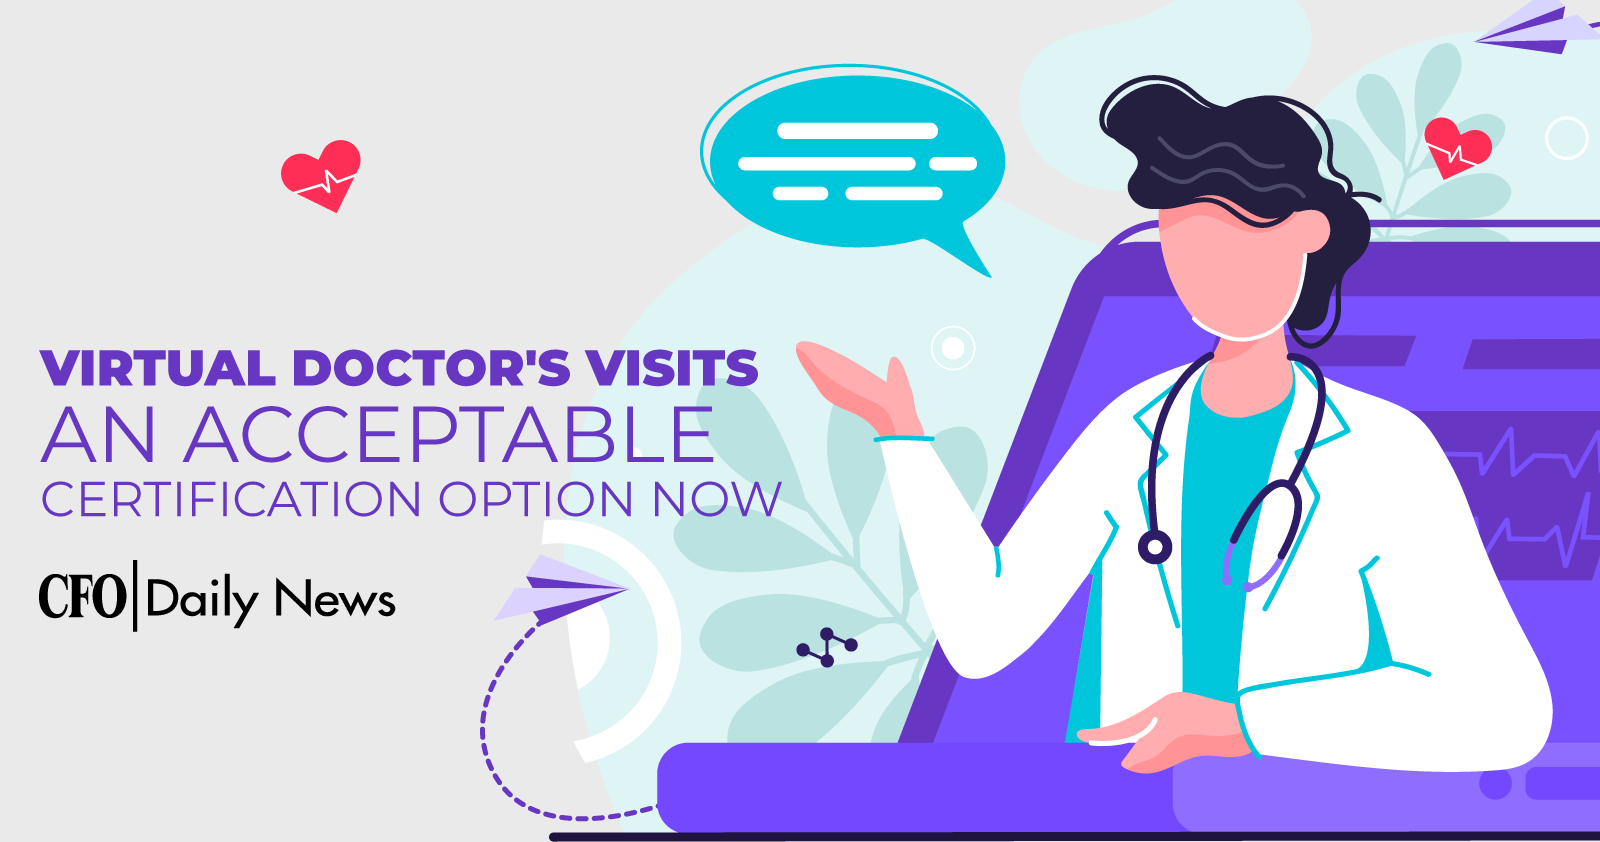 Virtual Doctors Visits An Acceptable Certification Option Now